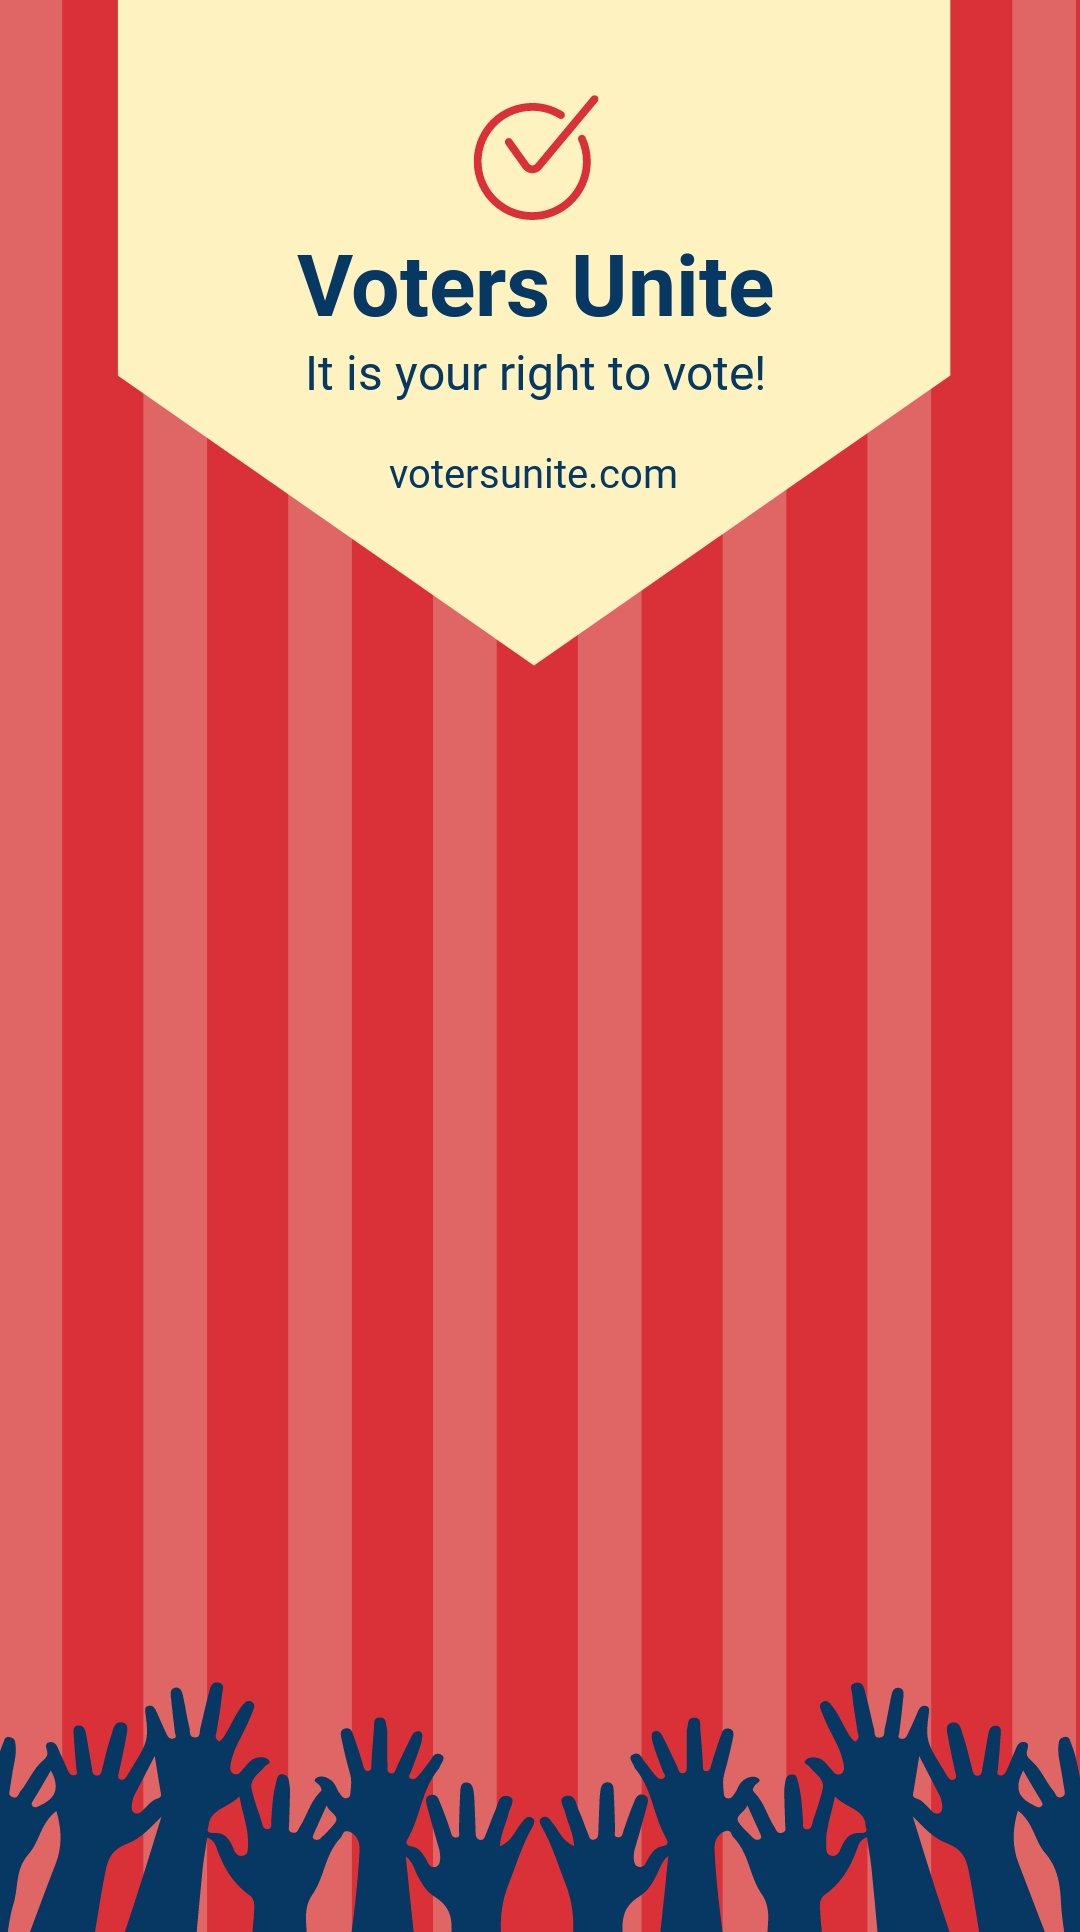 Election Campaign Snapchat Geofilter Template.jpe